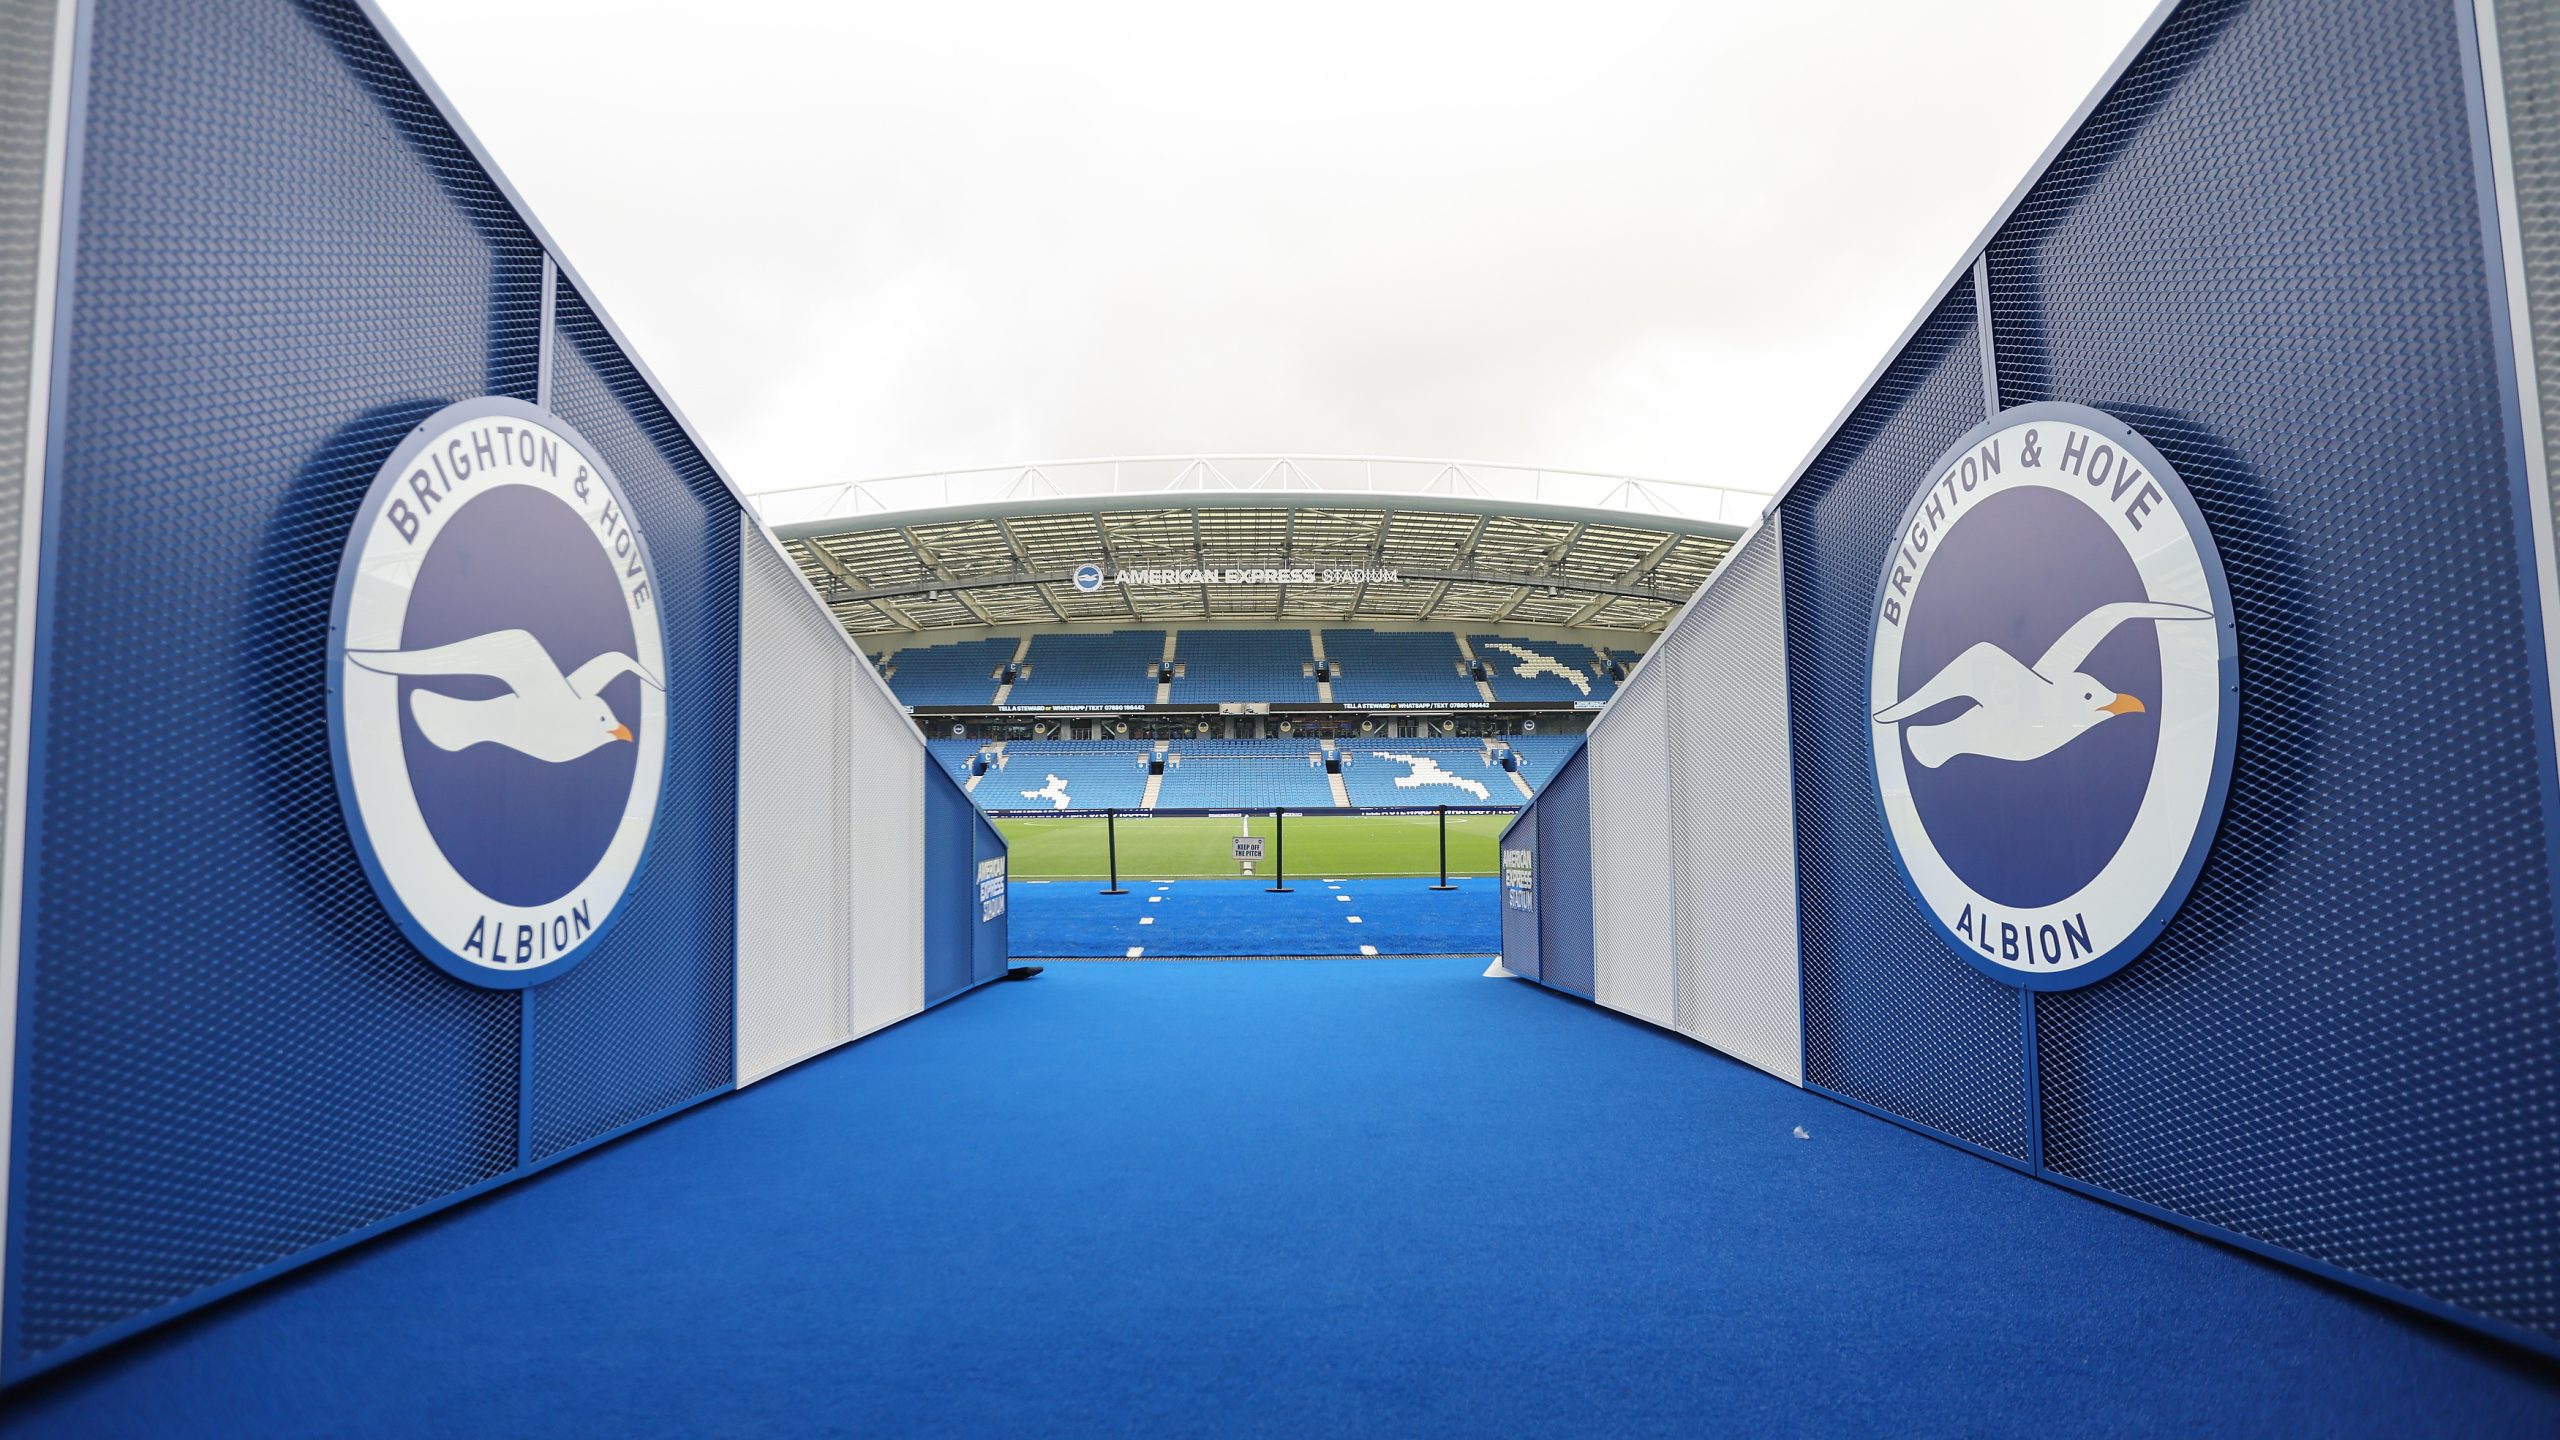 The view the players face at the Amex Stadium